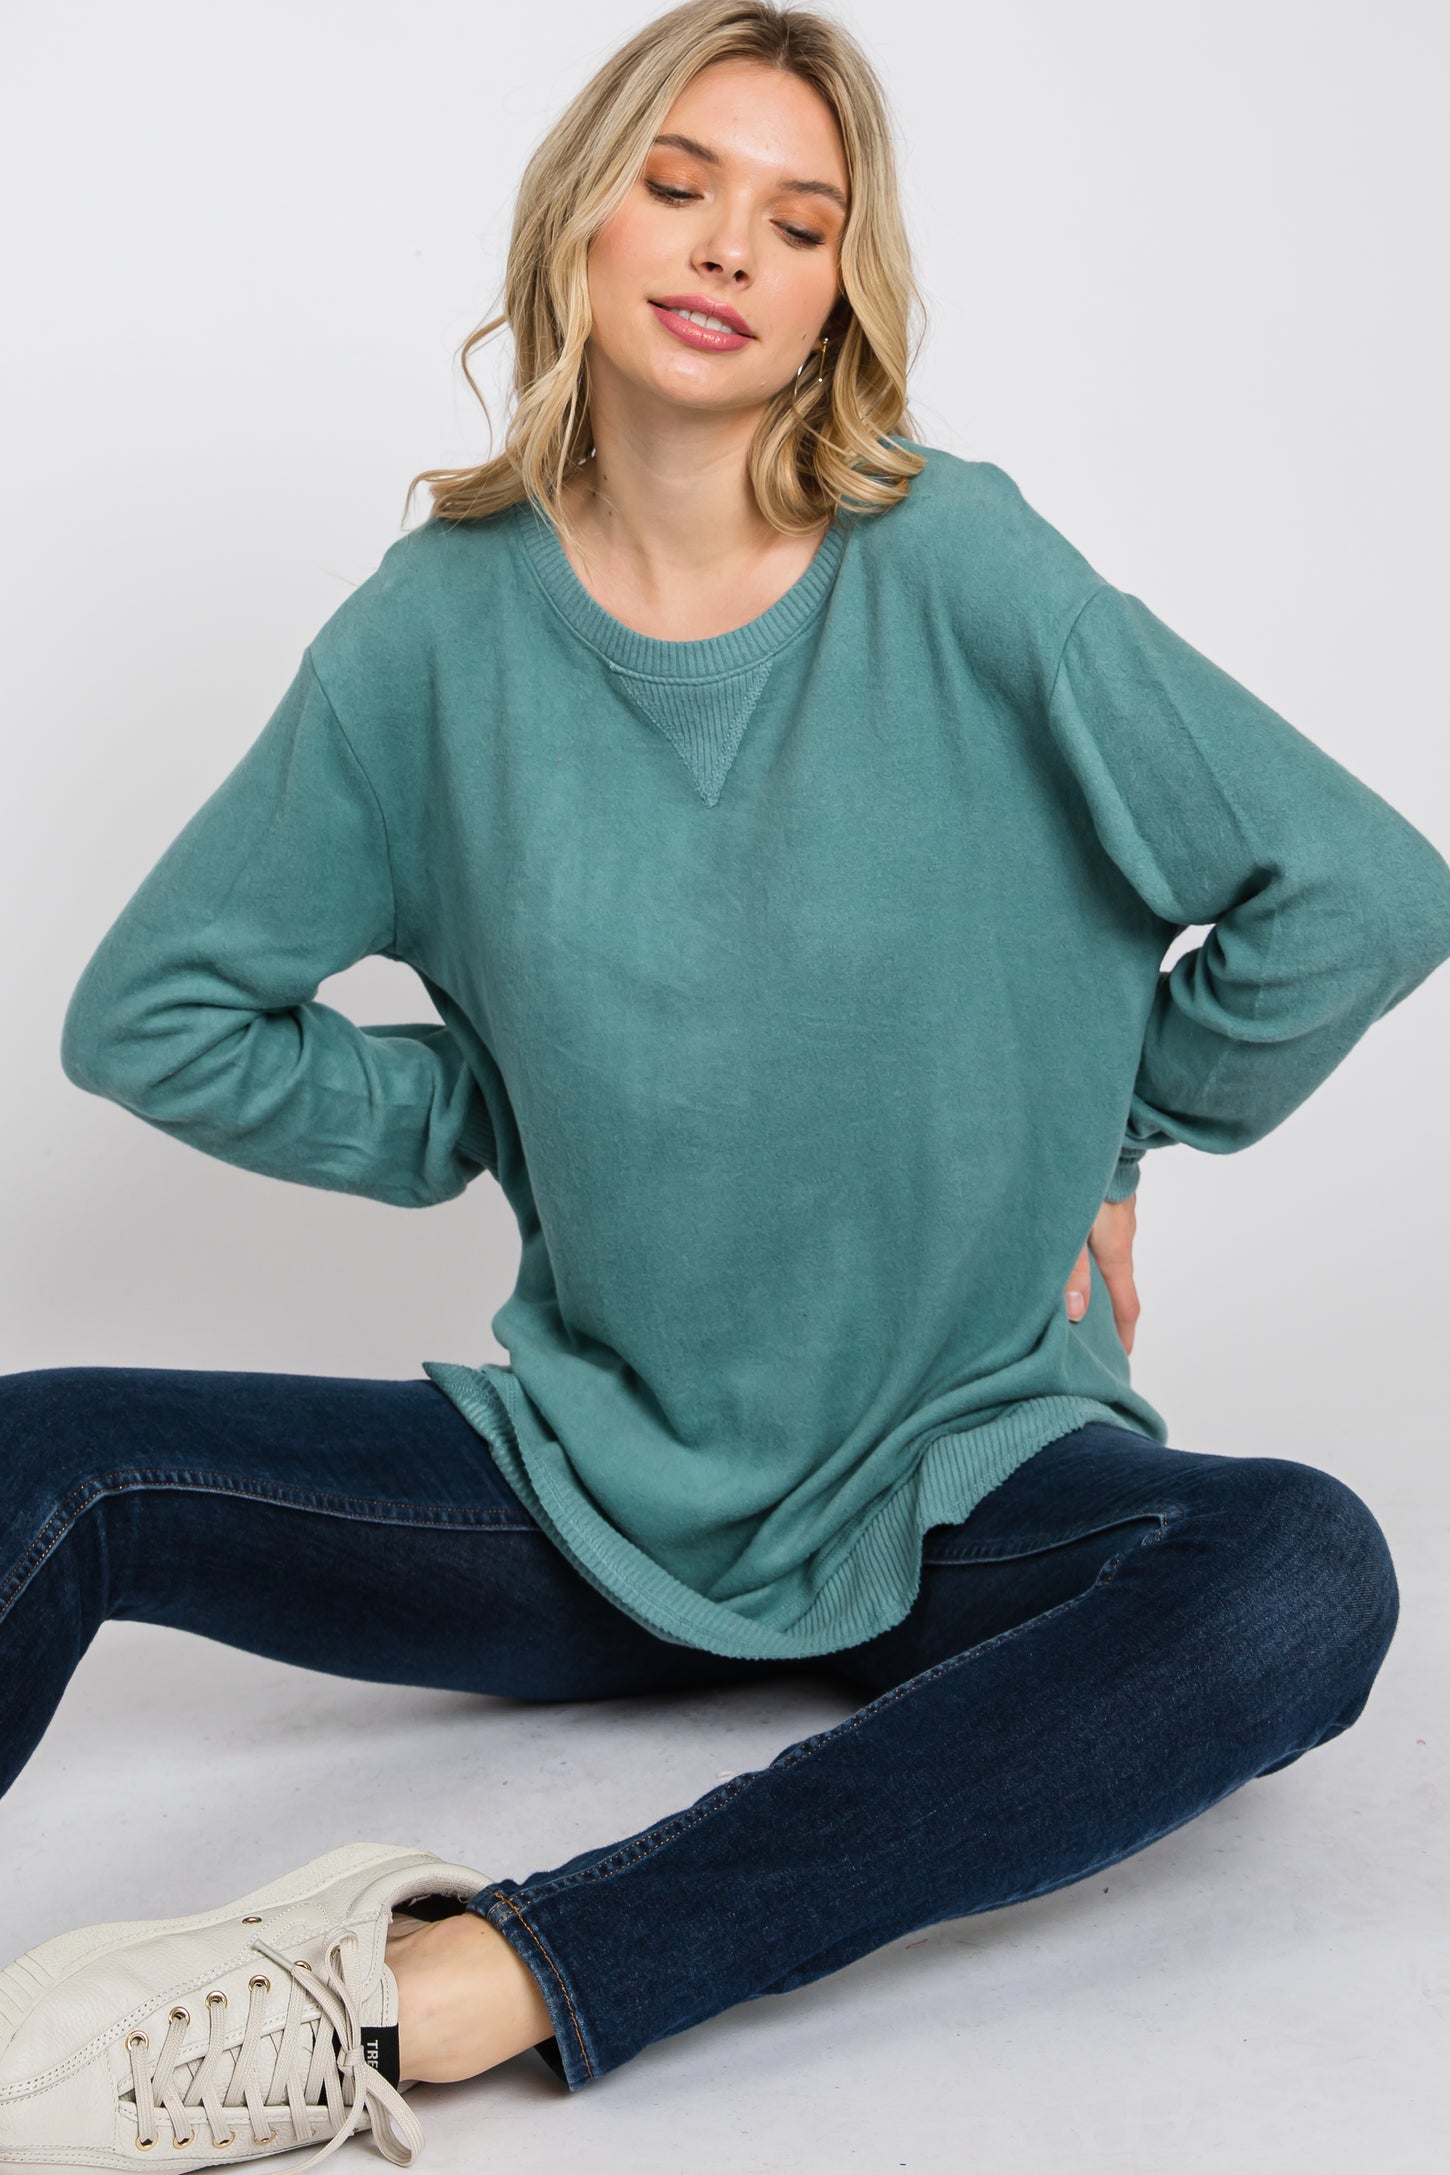 Teal Brushed Knit Rib Contrast Top